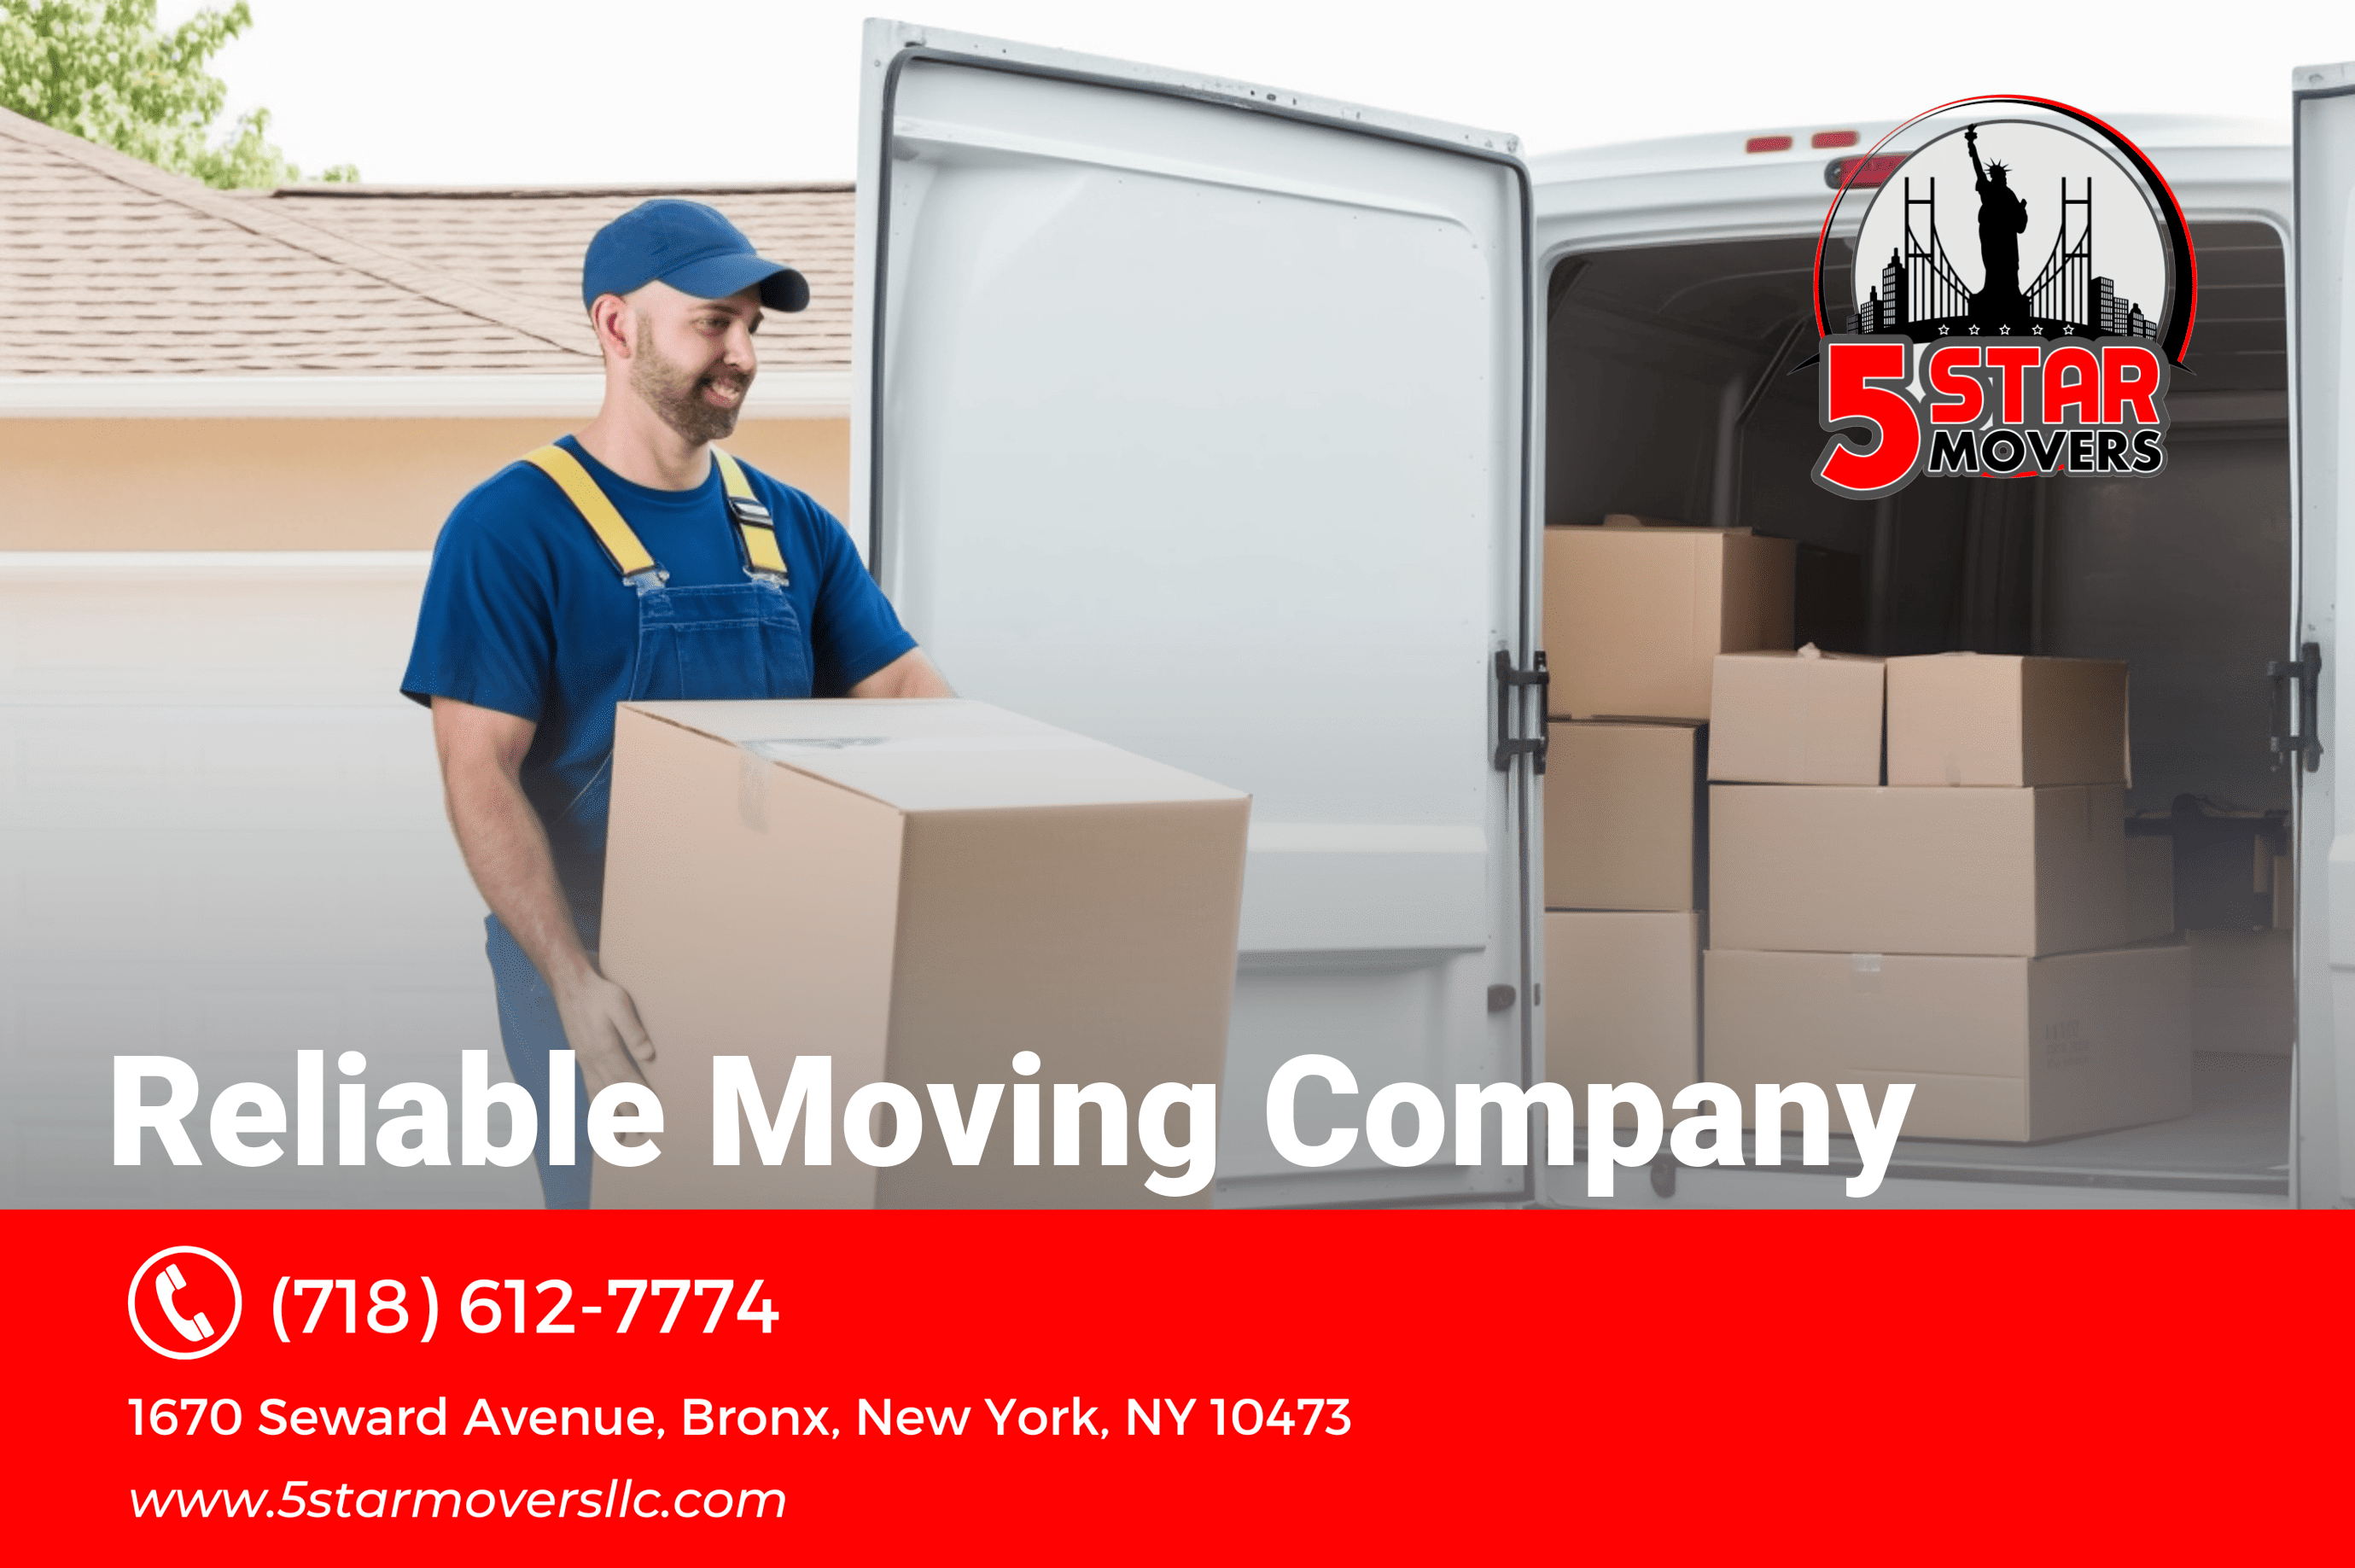 5 Star Movers LLC - Bronx Moving Company - The Bronx, NY, US, long distance movers